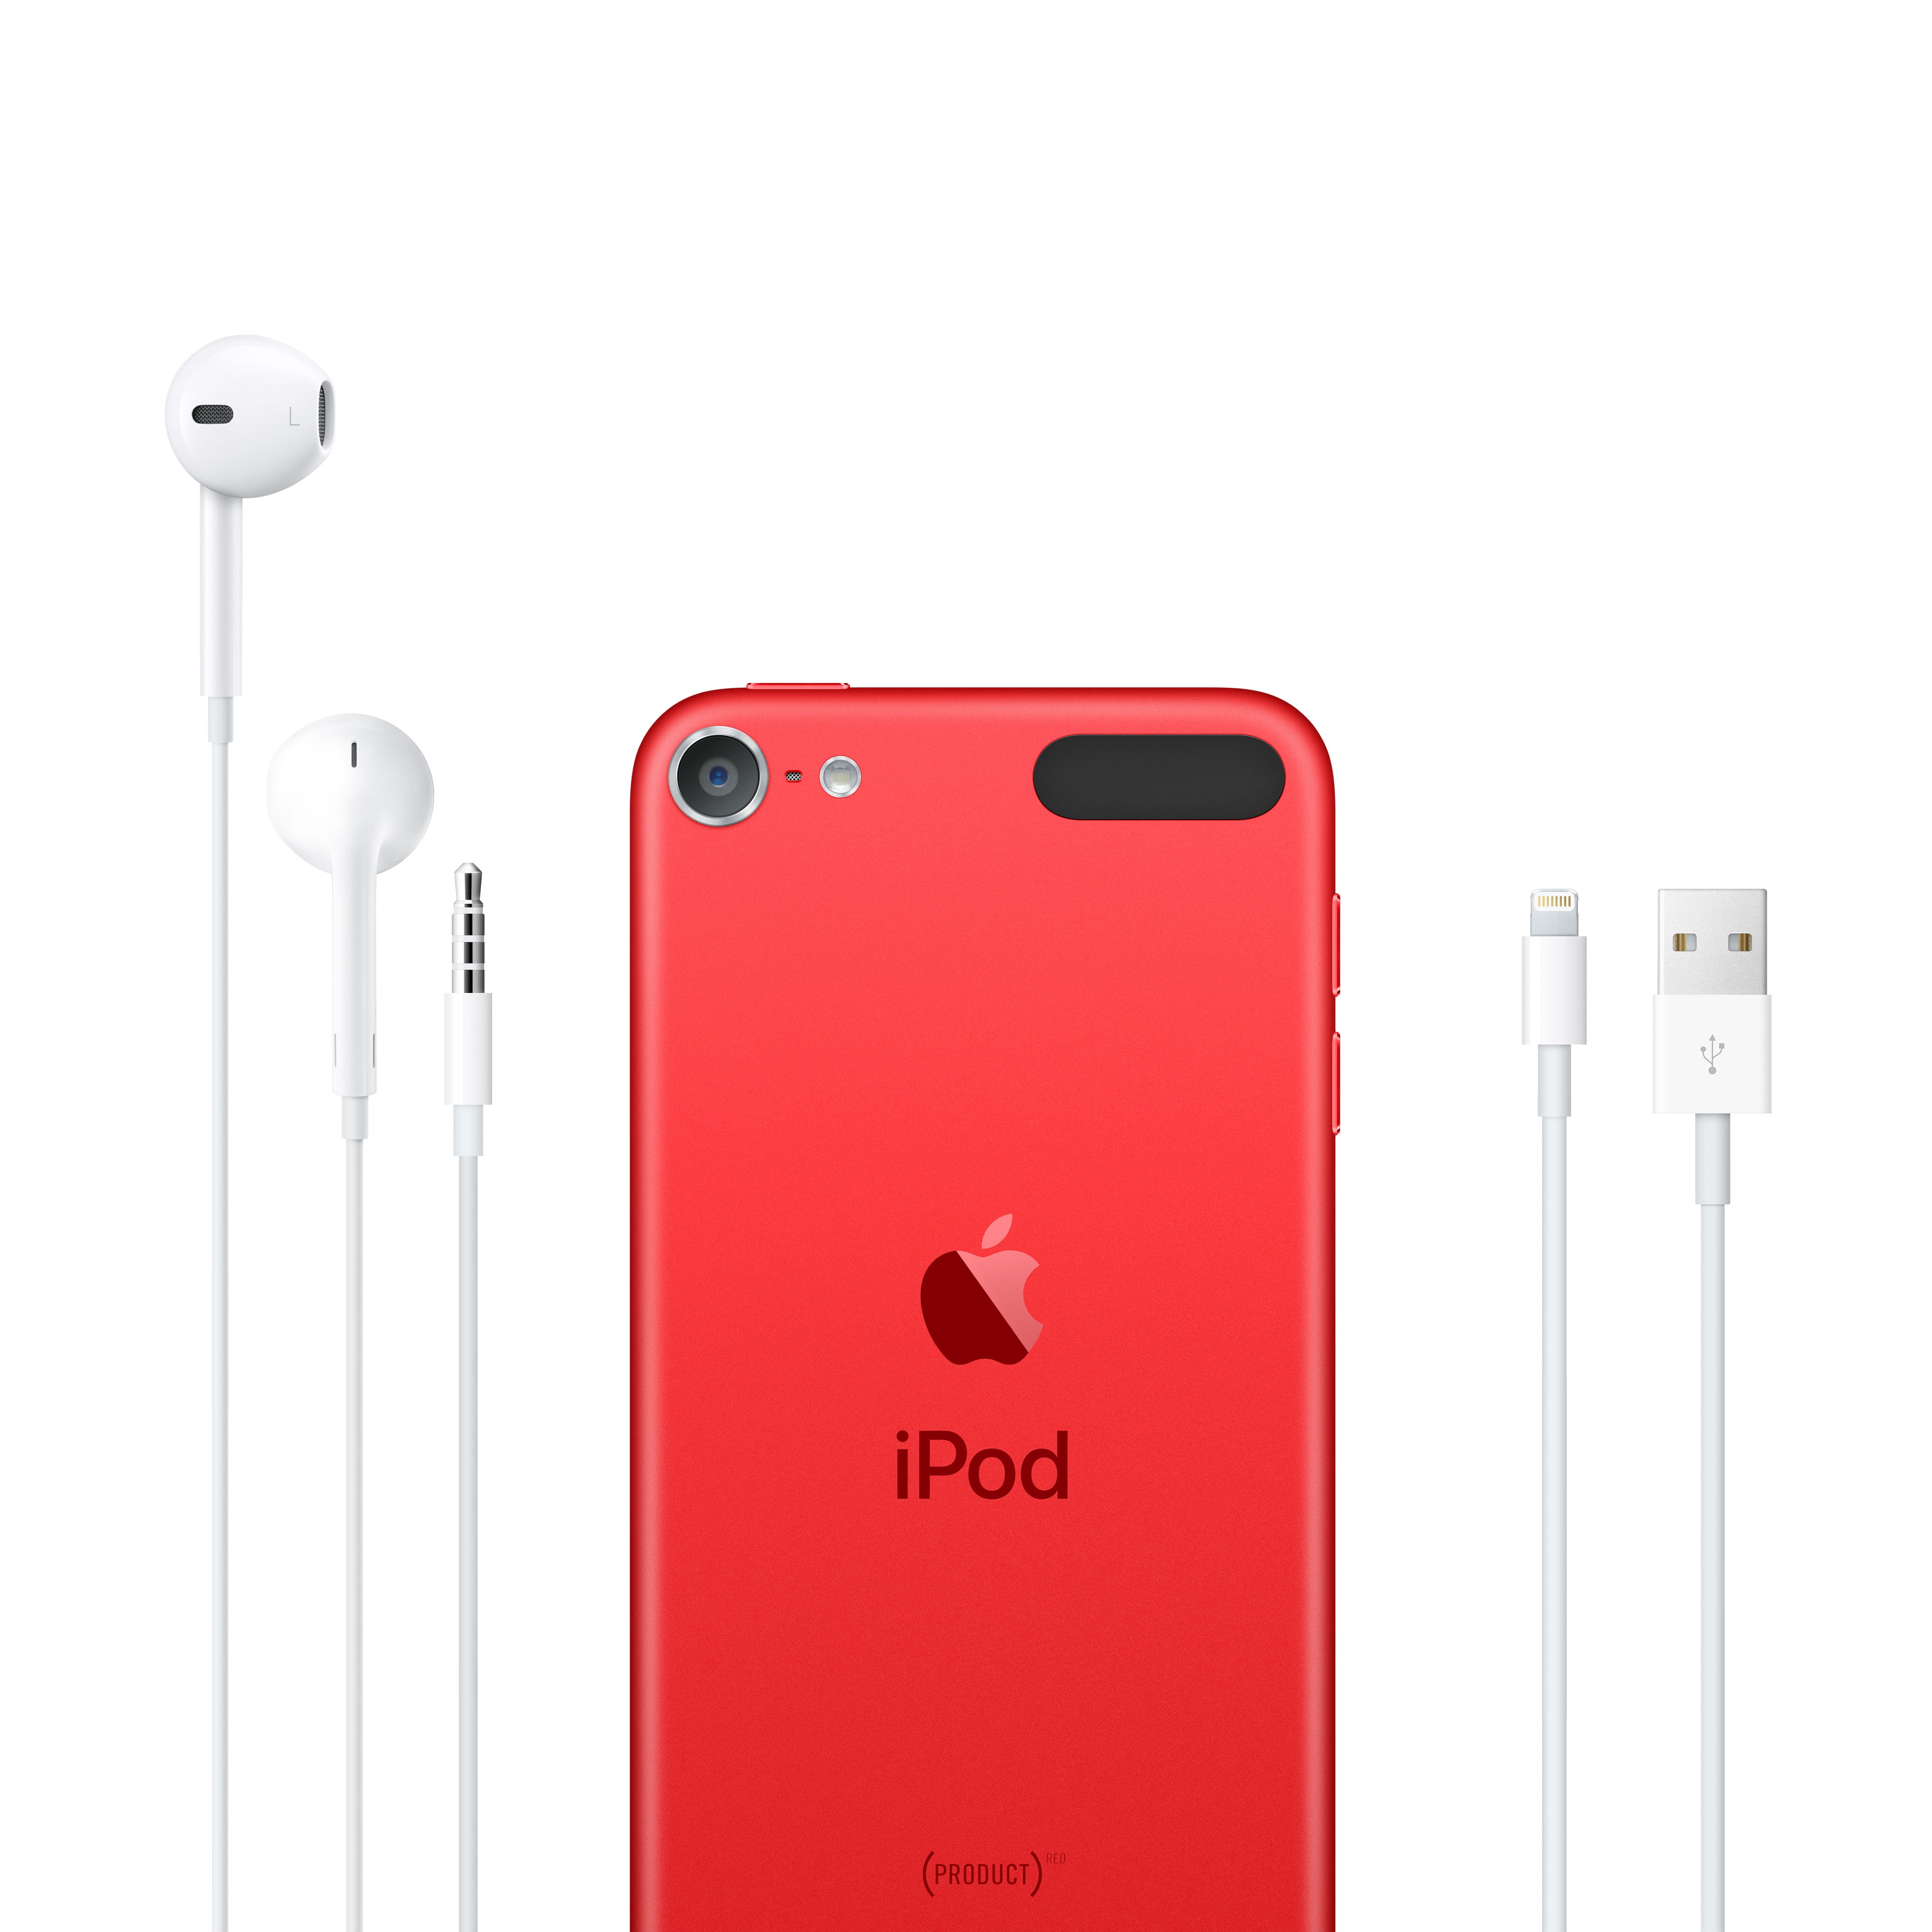 Apple iPod touch 7th Generation 128GB - PRODUCT(RED) (New Model